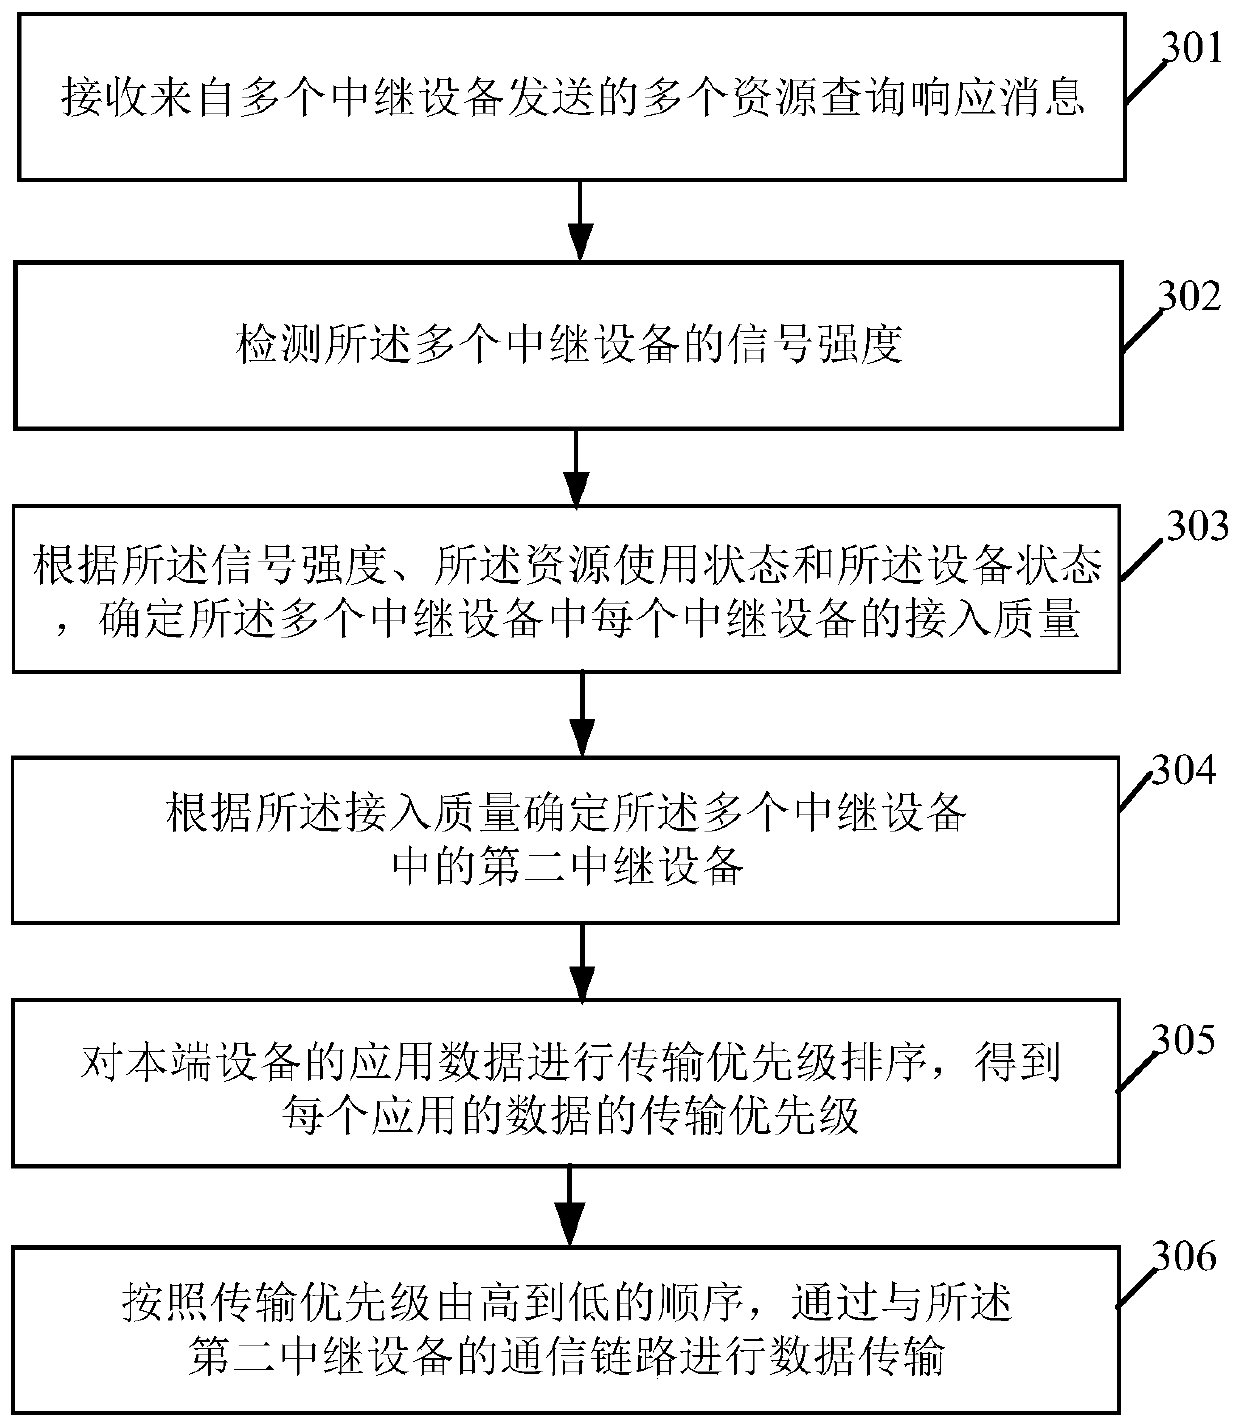 Communication control method and related product